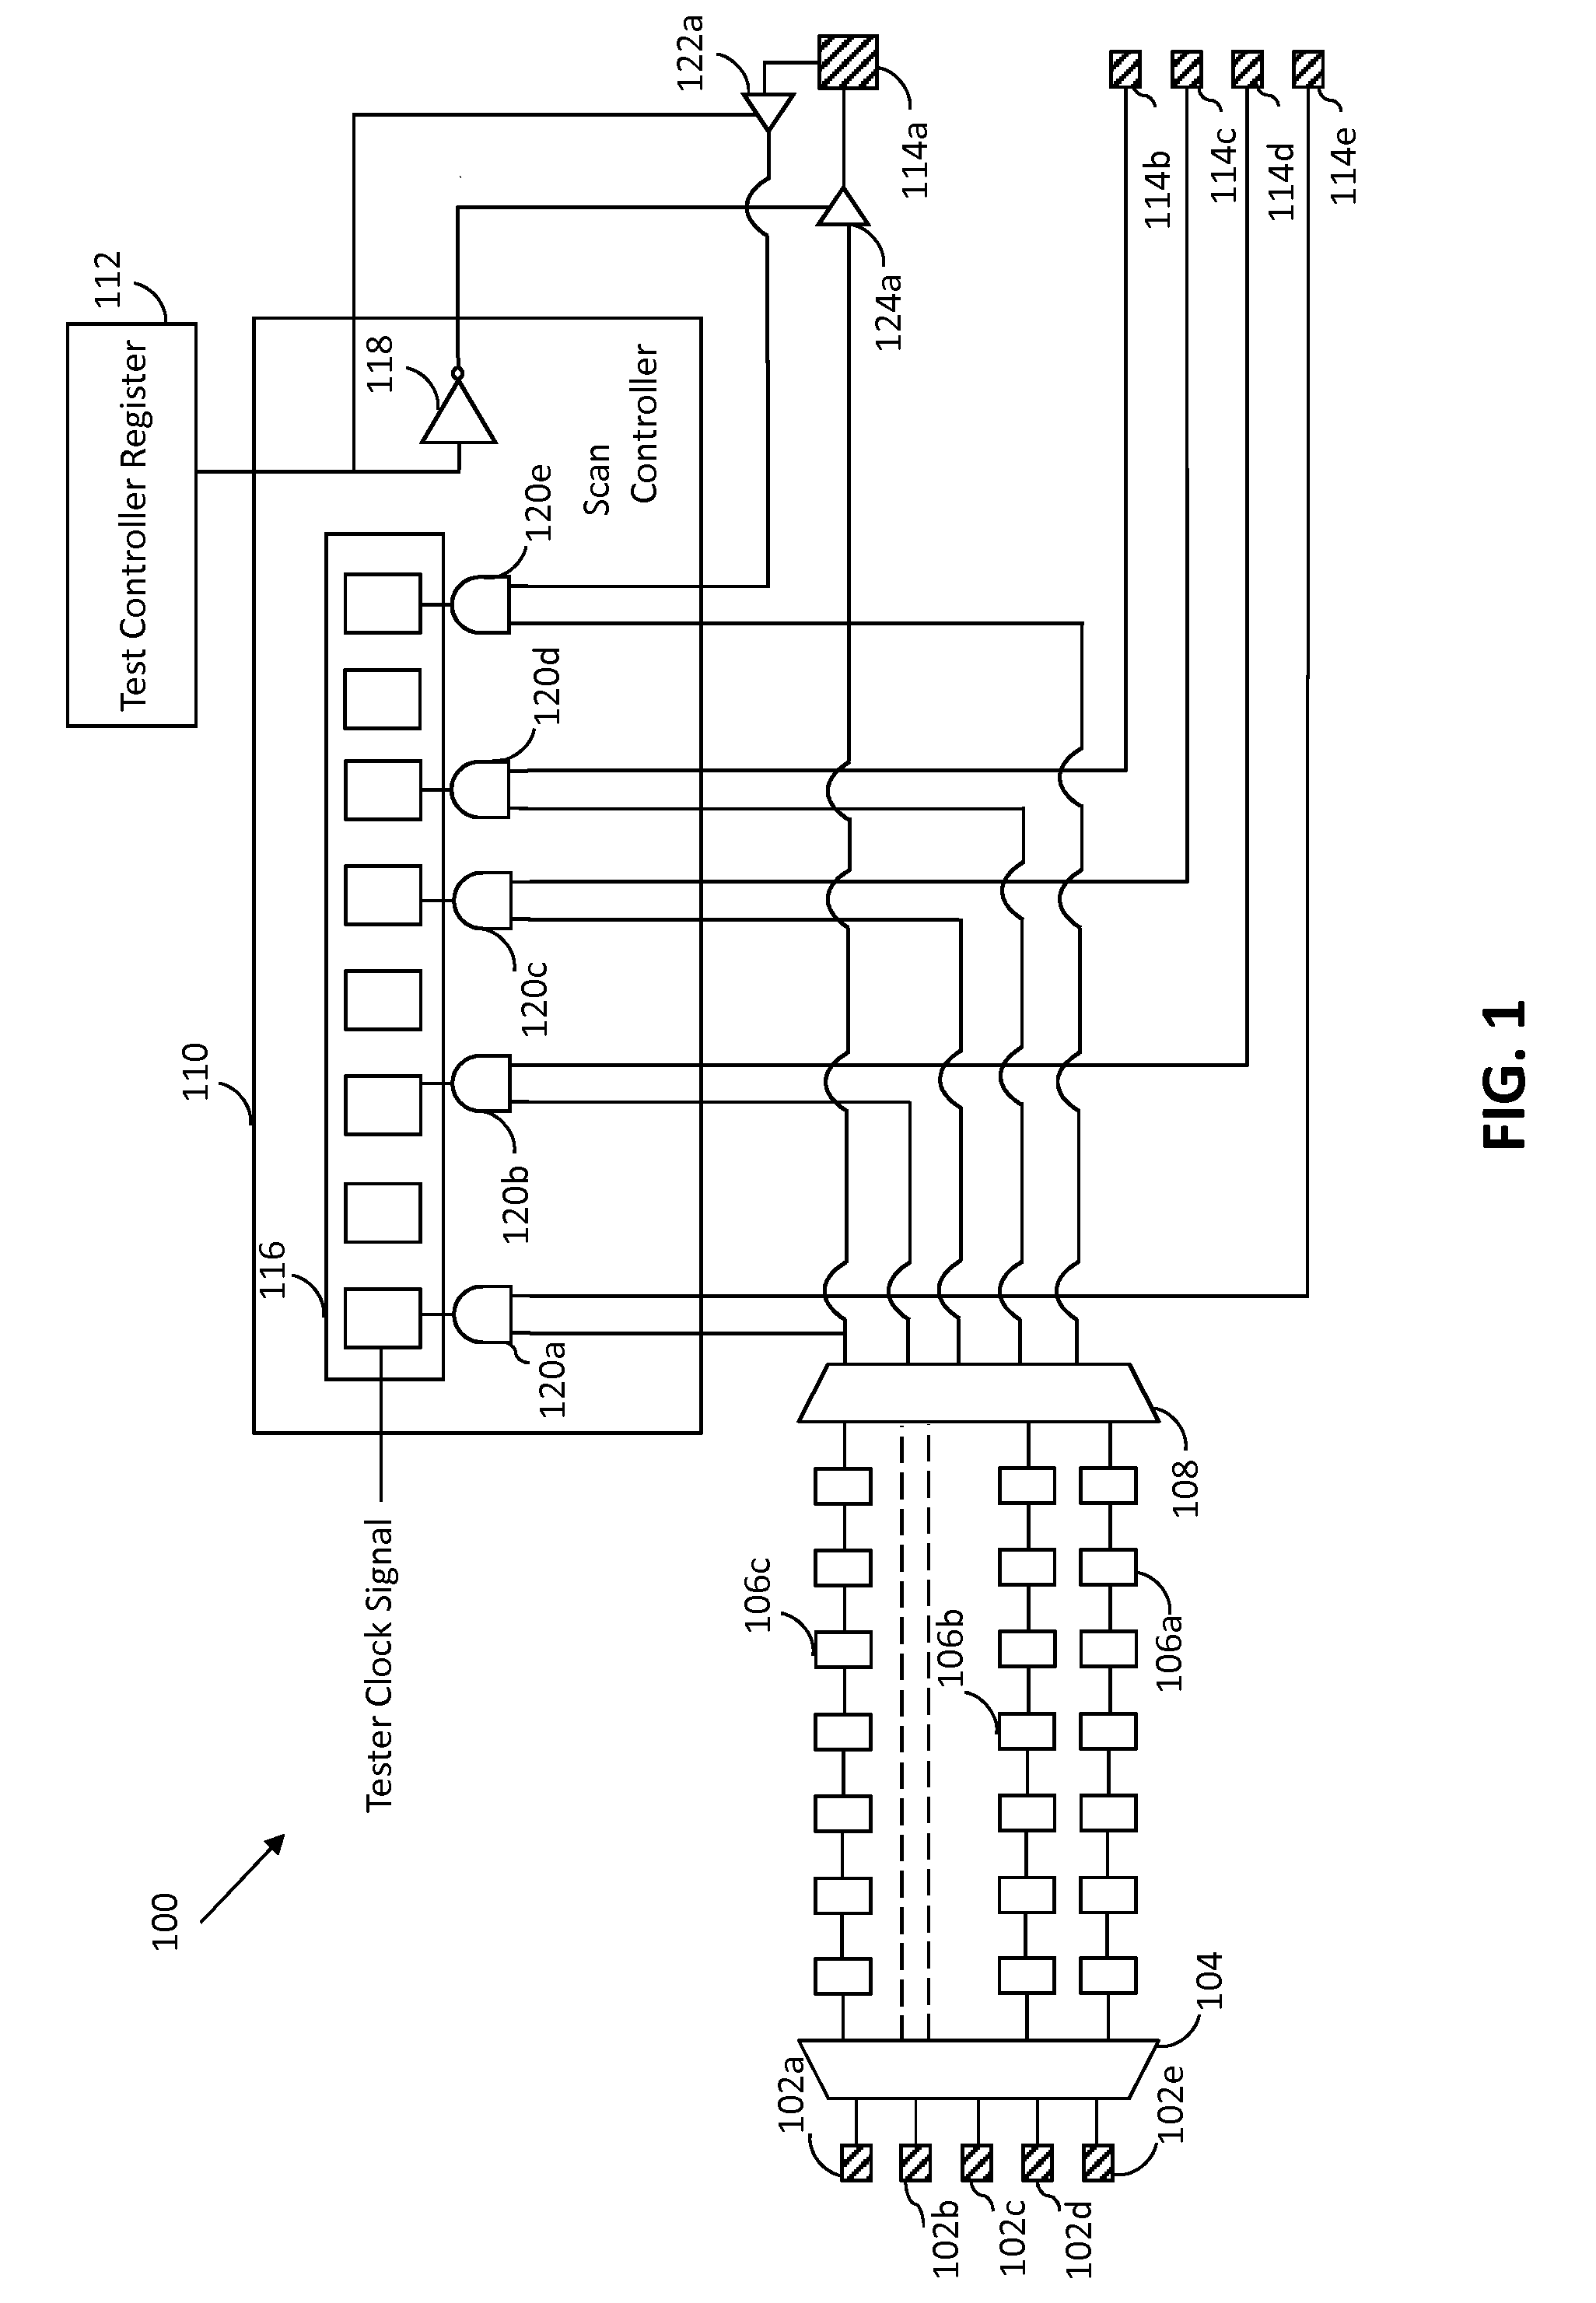 Structural testing of integrated circuits